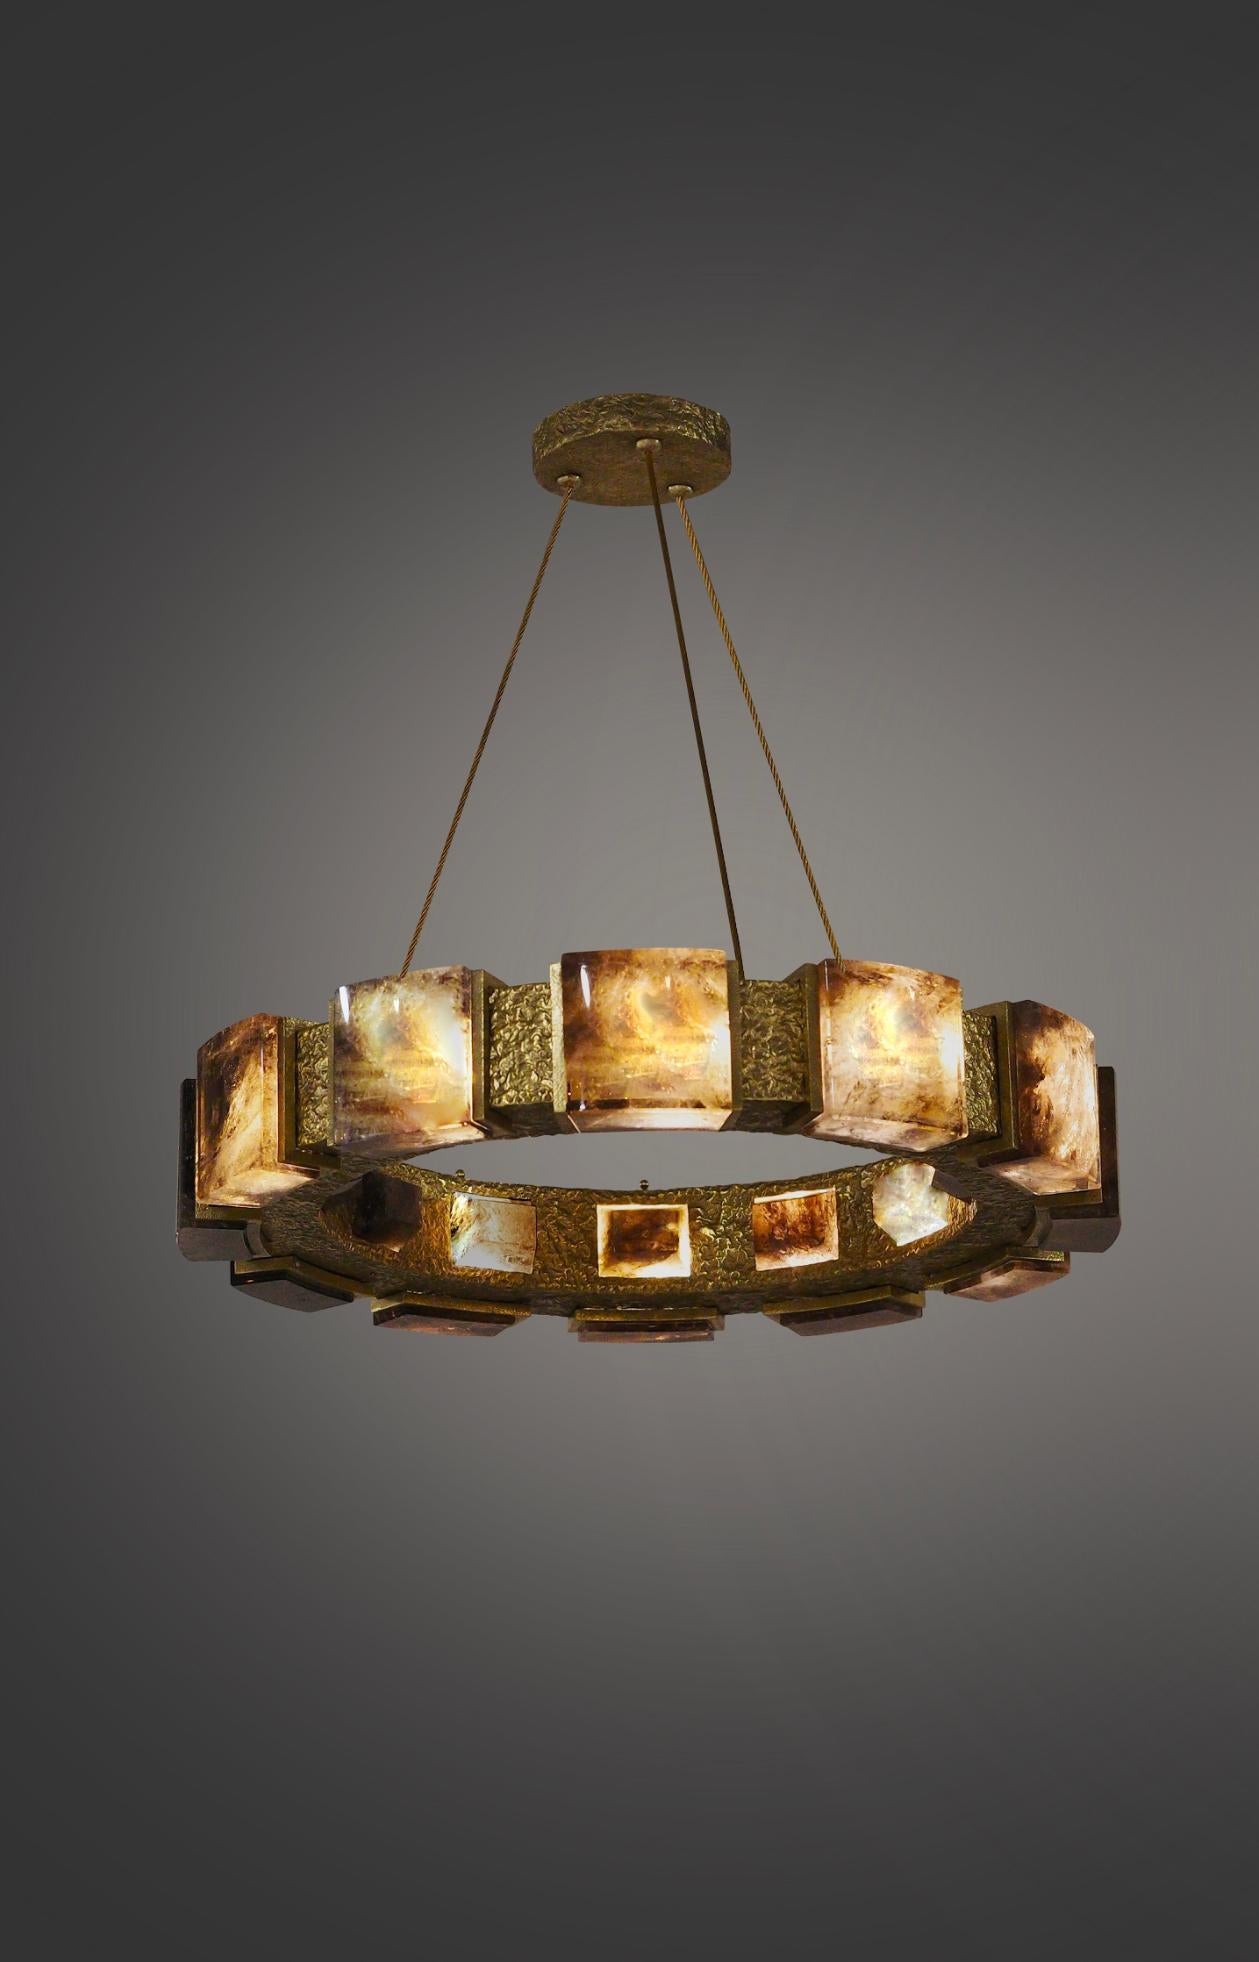 Smoky rock crystal chandelier with hammered brass detail. Created by Phoenix Gallery, NYC.
12 sockets installed. Use 12 of G9 lightbulbs. 60watts each, total 720w max.